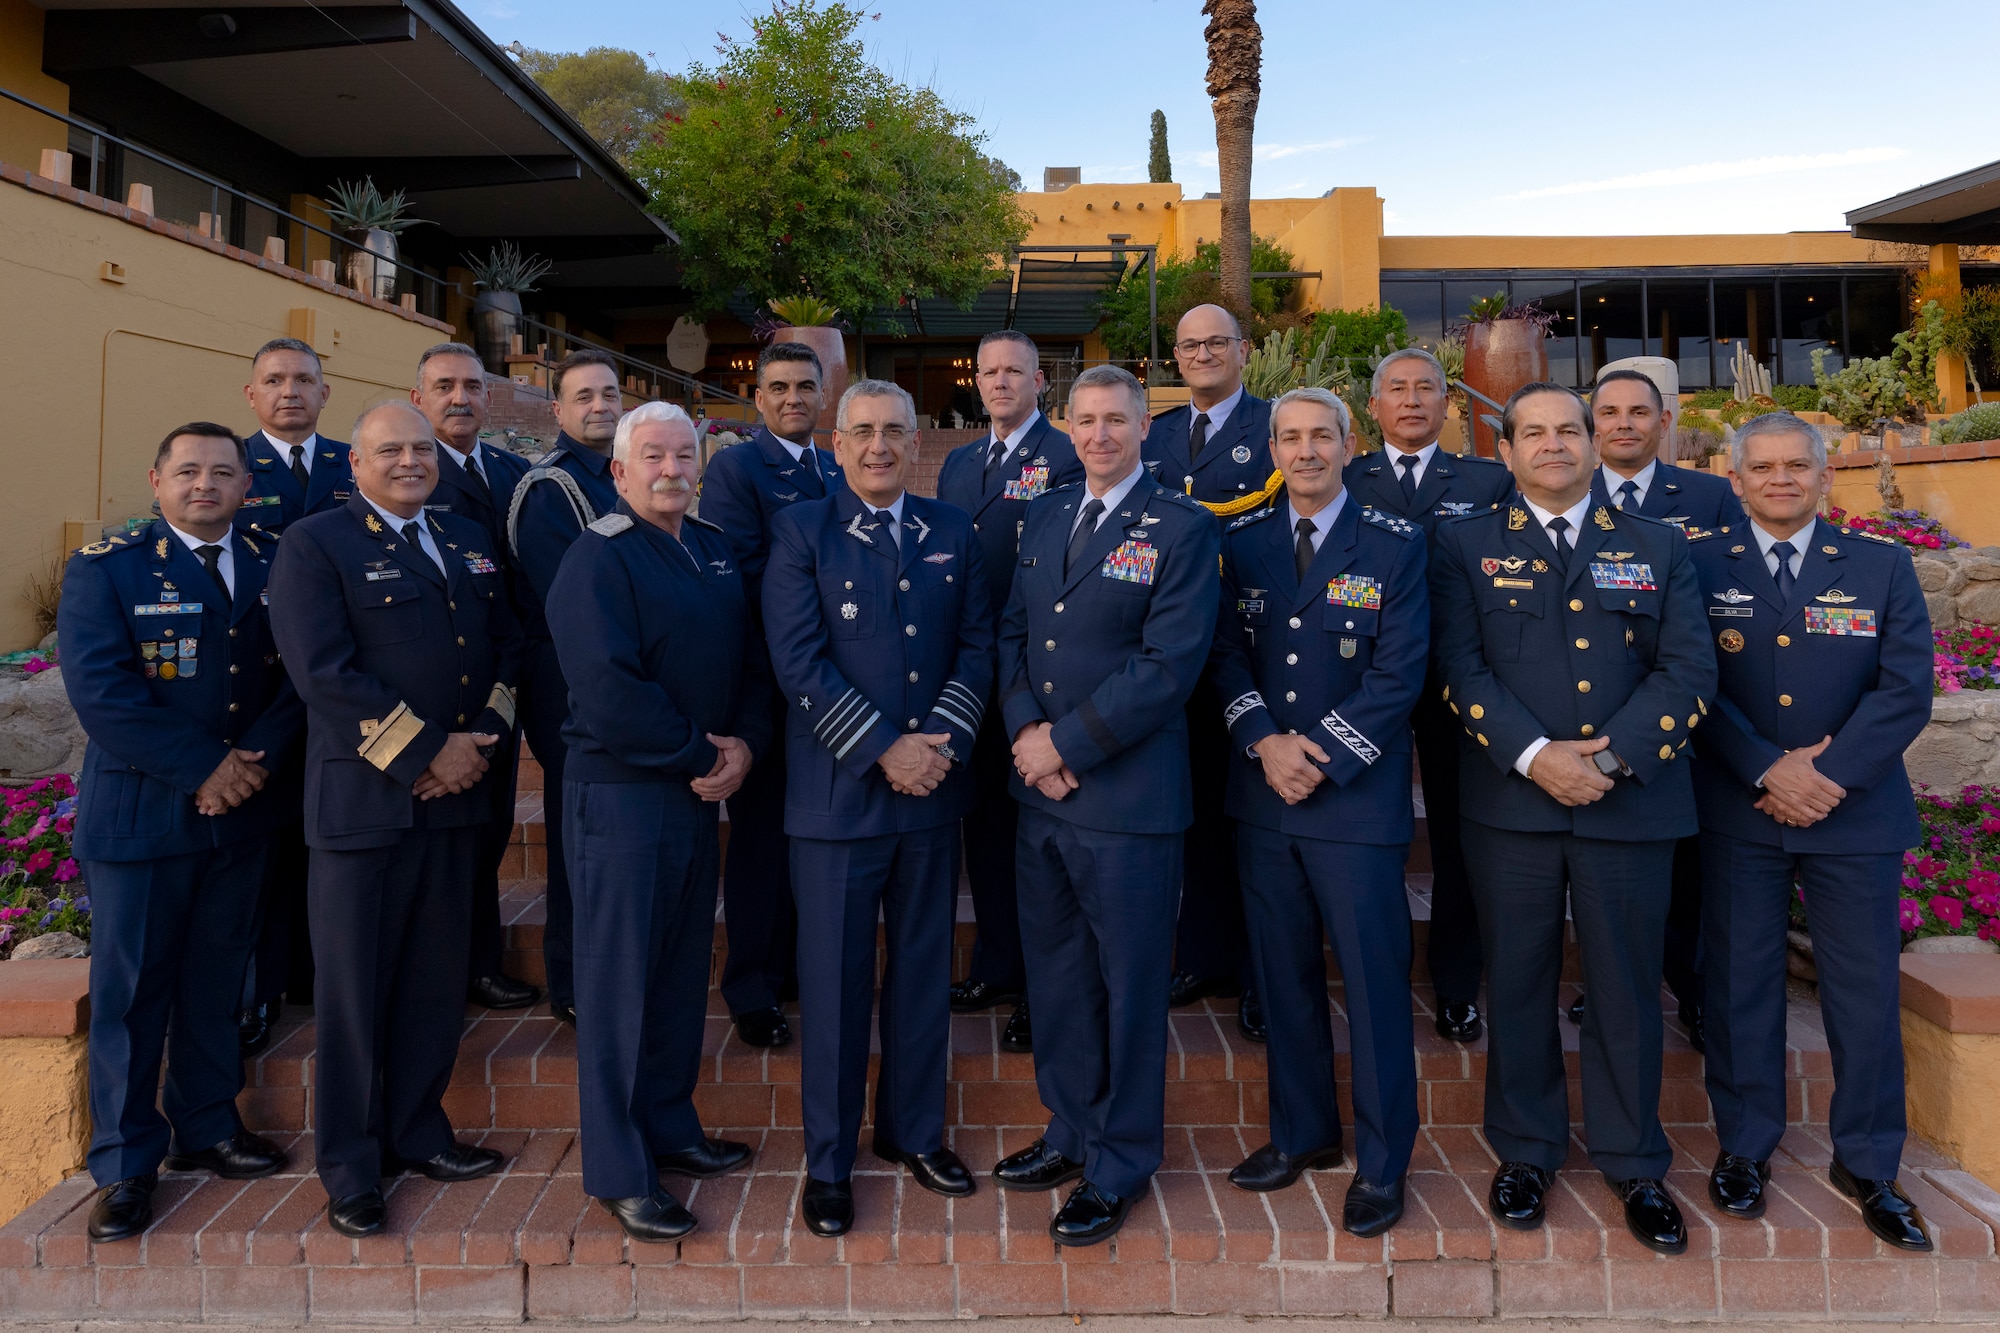 Air Chiefs and Senior Enlisted Leaders from Argentina, Brazil, Chile, Colombia, Paraguay, Peru, Uruguay, and the United States, pose for a photo during the South American Air Chiefs Conference in Tucson, Ariz. Dec. 5, 2023.